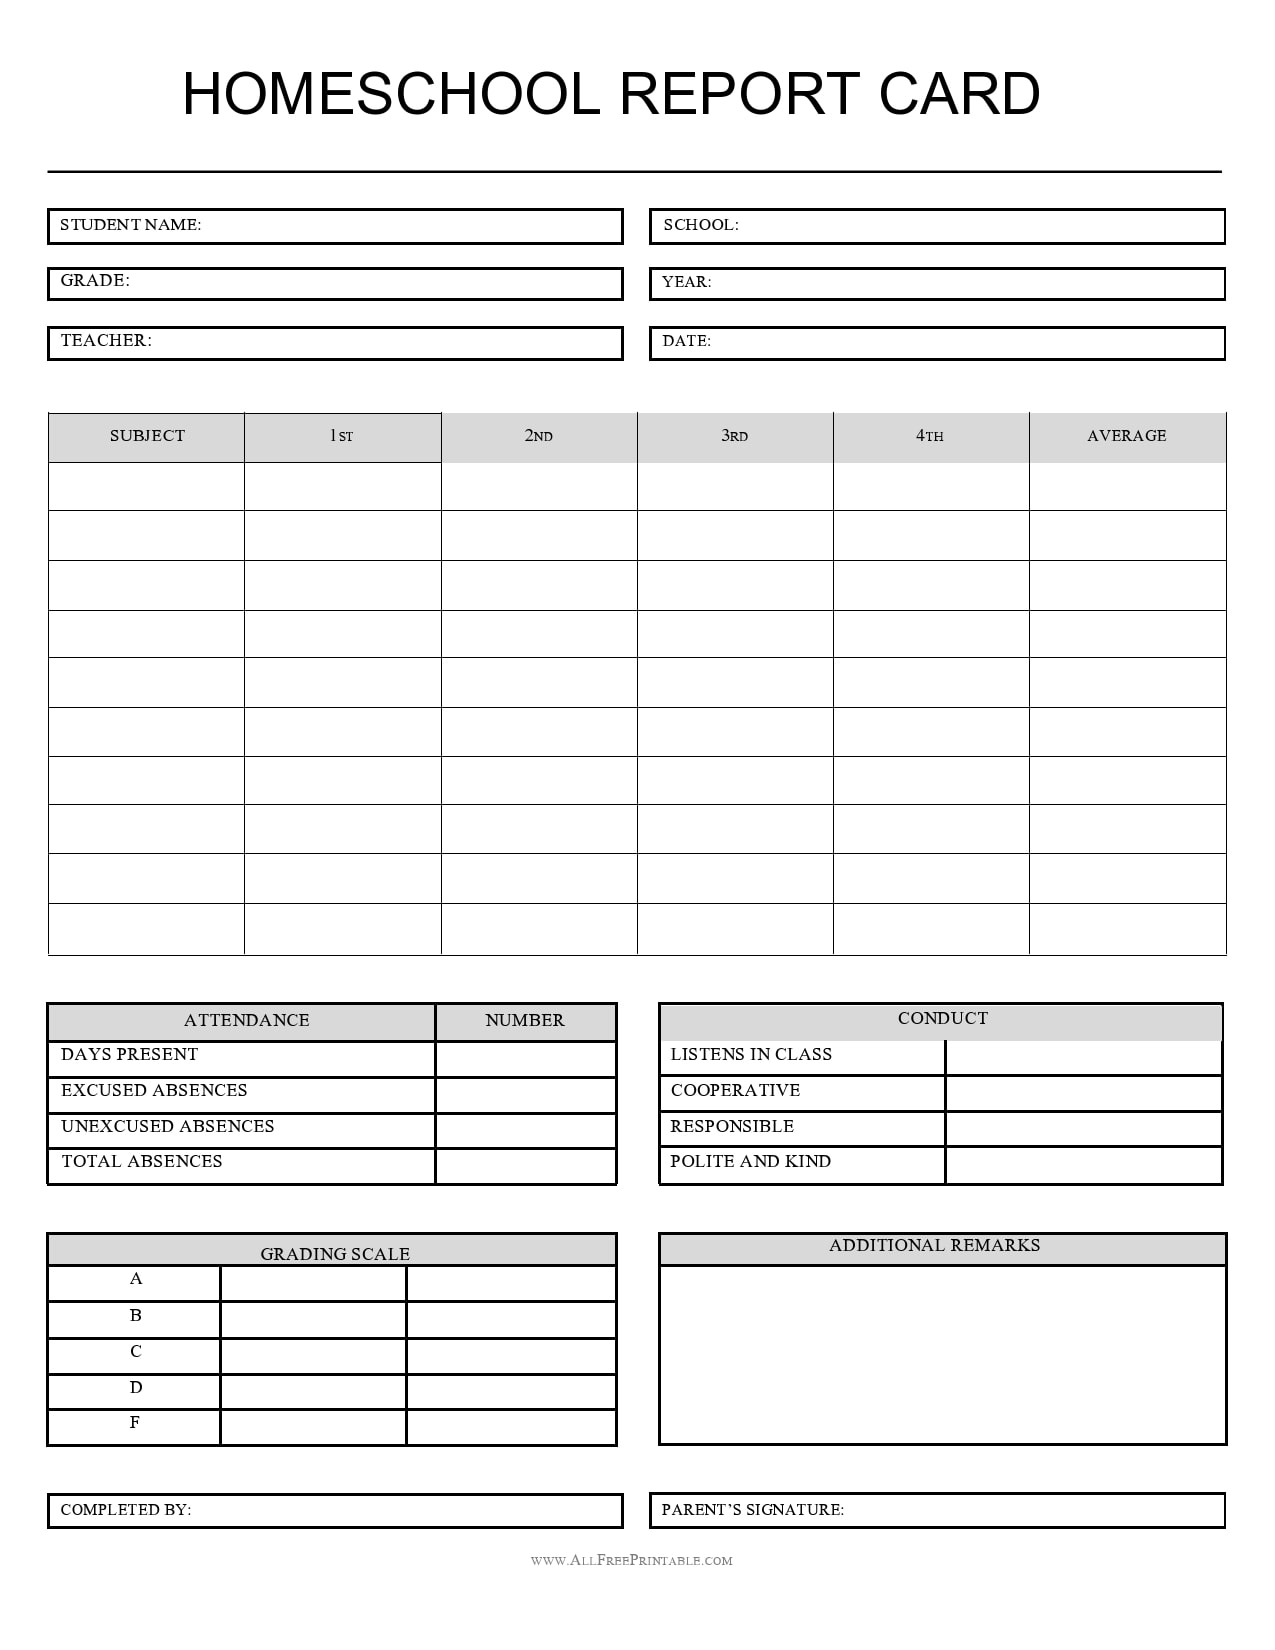 printable-report-card-forms-printable-forms-free-online